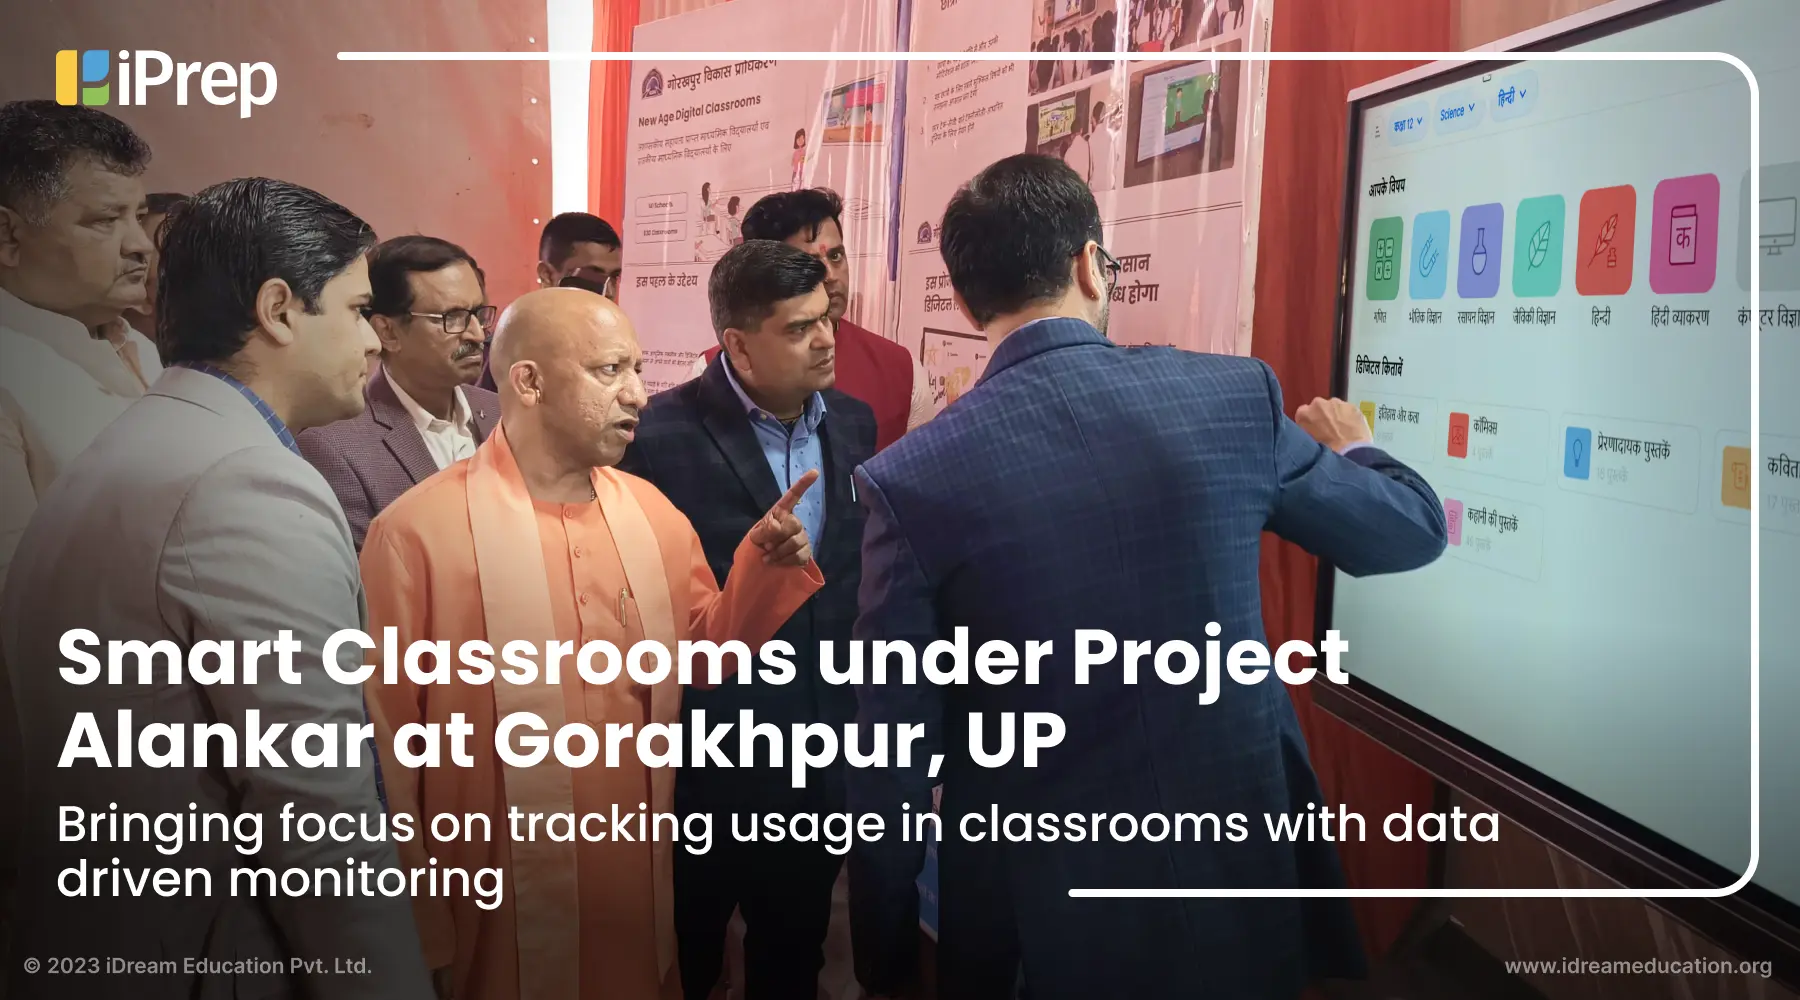 Image of Smart classrooms under Project Alankar in Gorakhpur, Uttar Pradesh, set up by iDream Education, featuring digital content and a smart classroom LMS, with ongoing reporting